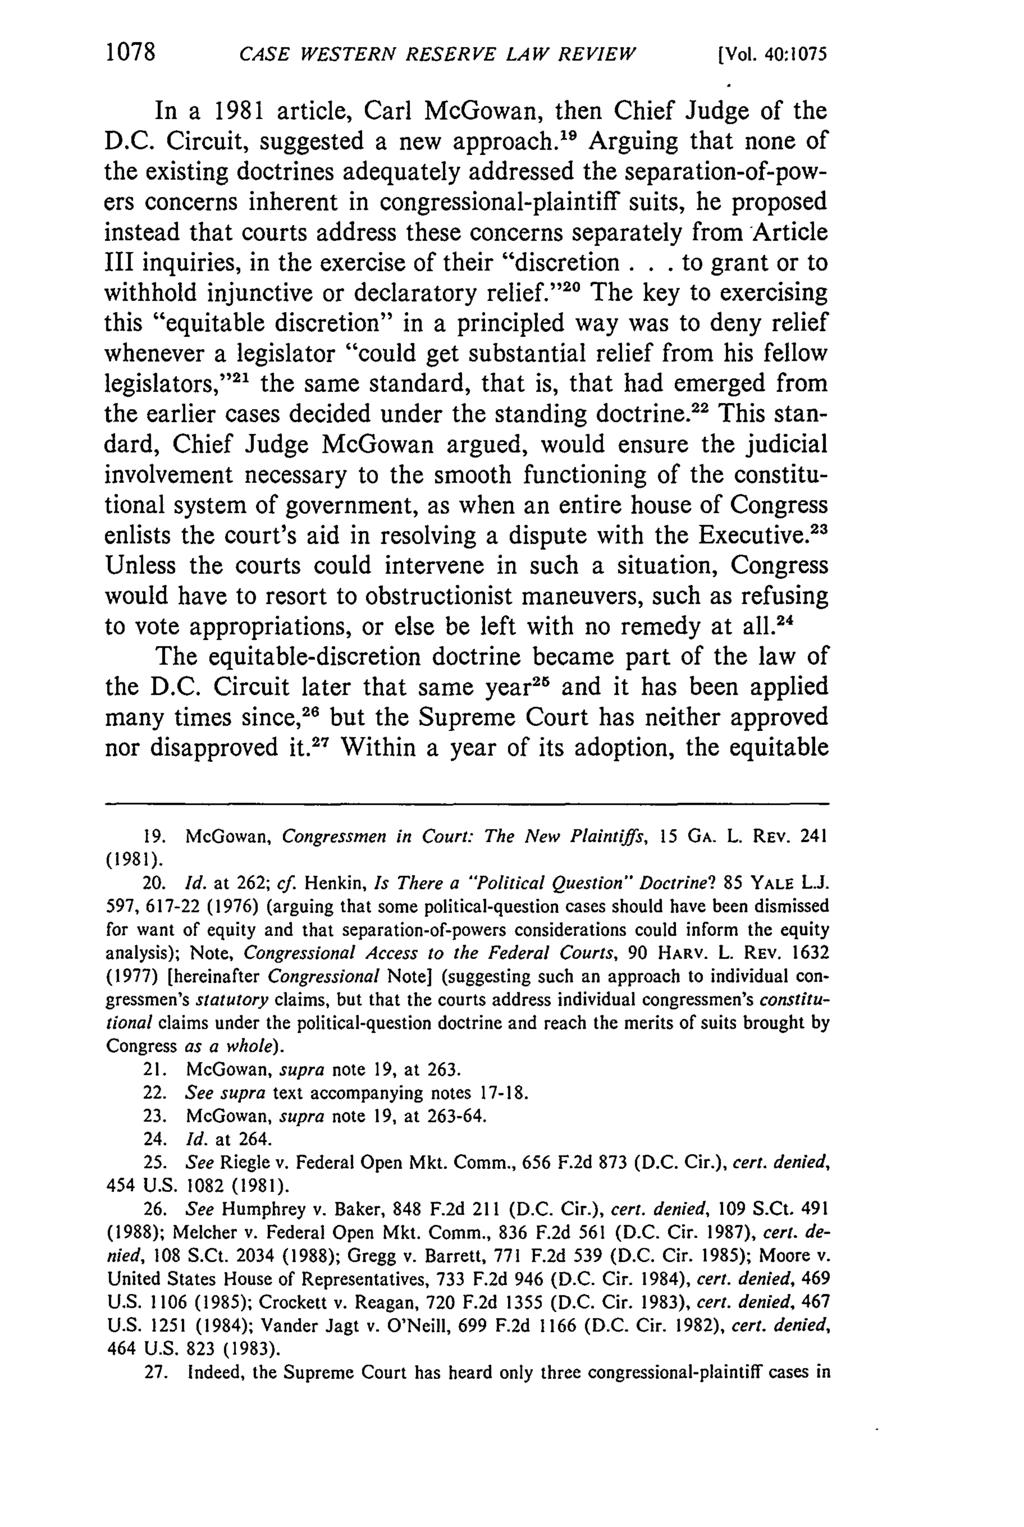 1078 CASE WESTERN RESERVE LAW REVIEW [Vol. 40:1075 In a 1981 article, Carl McGowan, then Chief Judge of the D.C. Circuit, suggested a new approach.